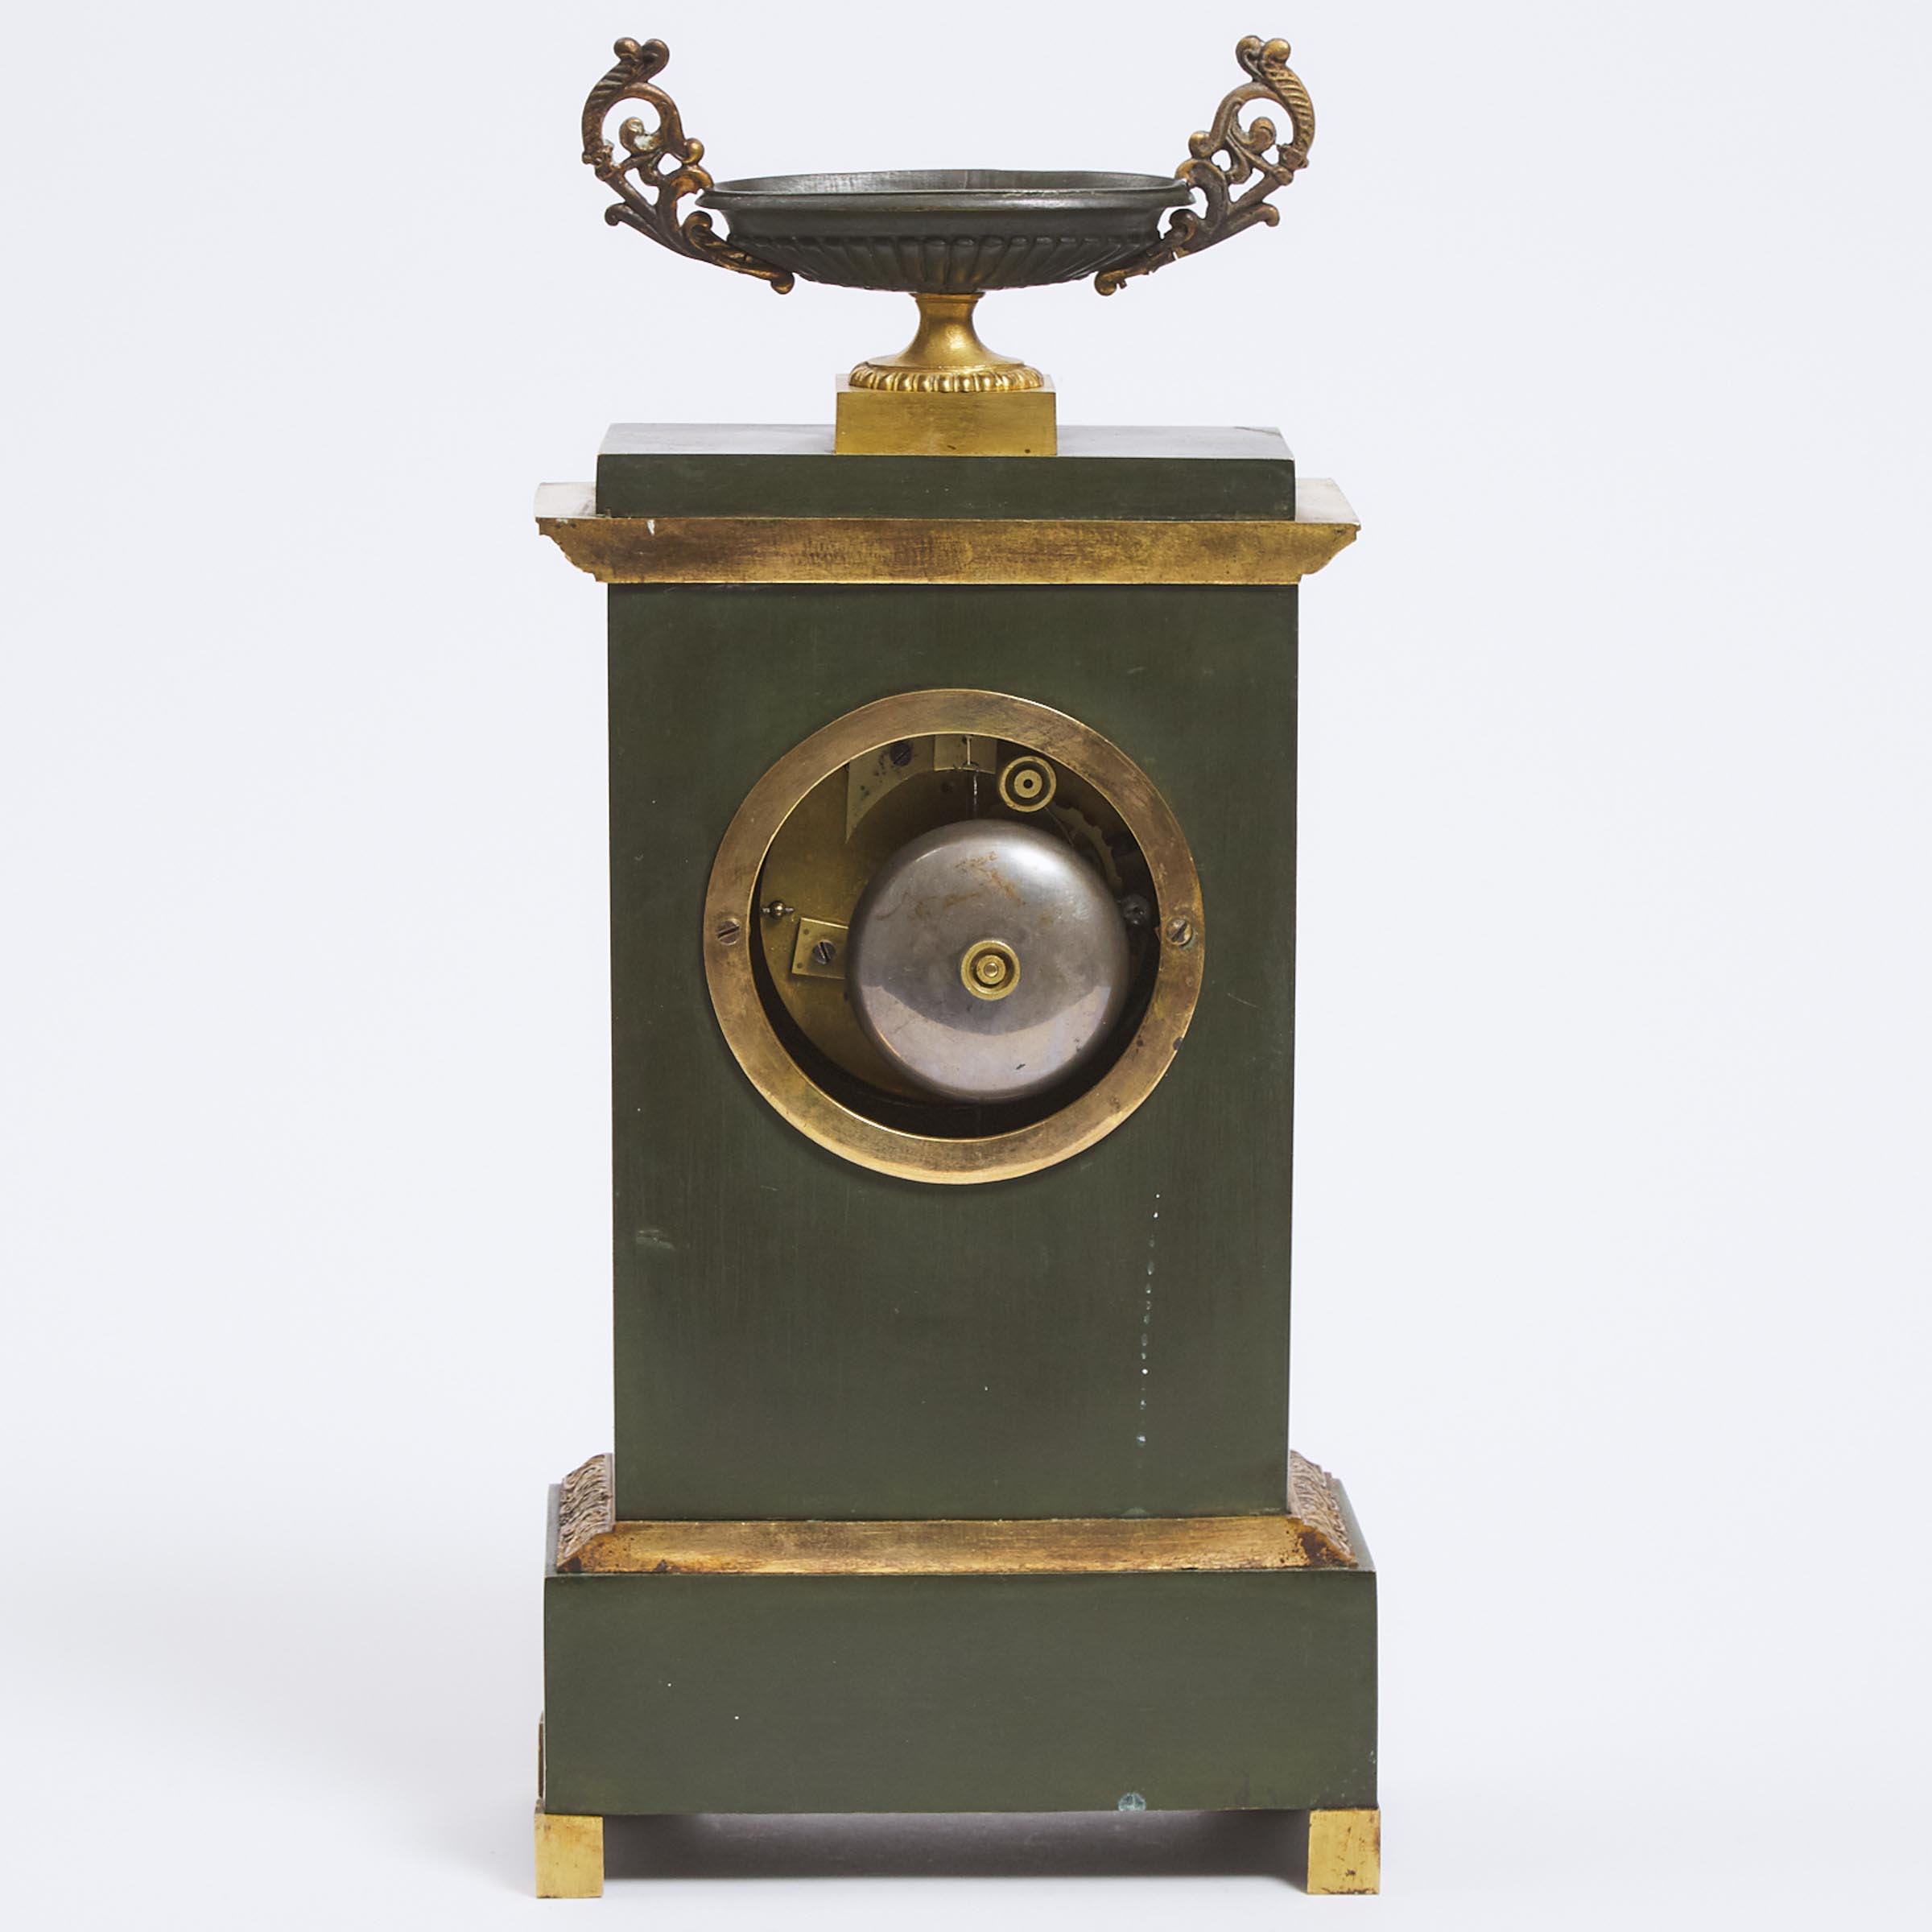 French Empire Gilt and Patinated Bronze Mantle Clock, early 19th century